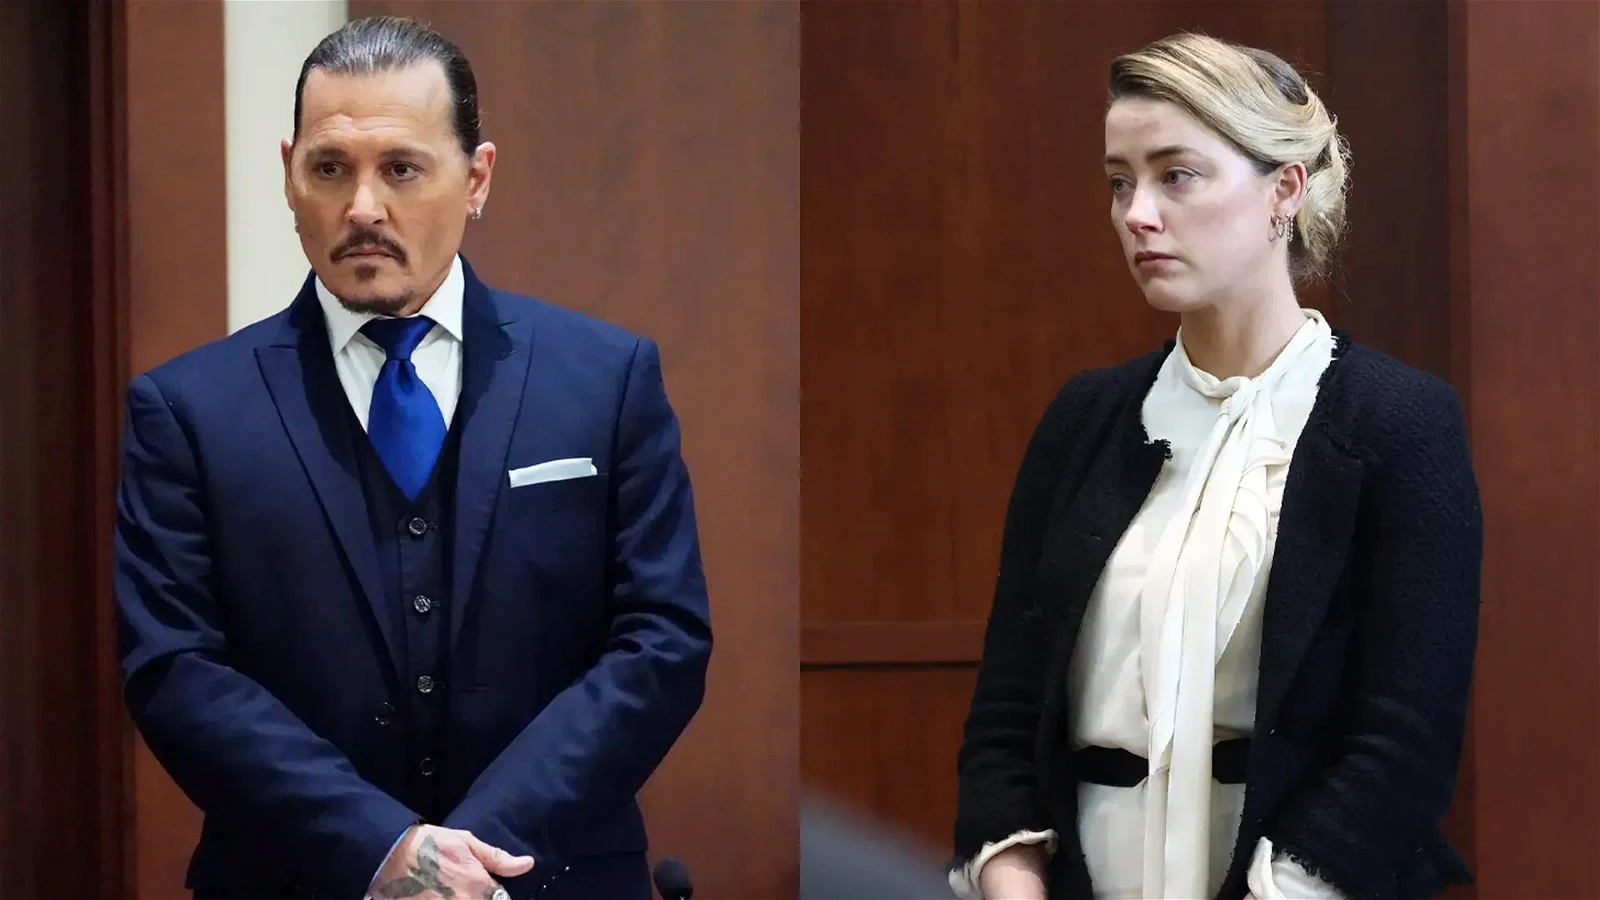 The former couple, Amber Heard and Johnny Depp during the trial